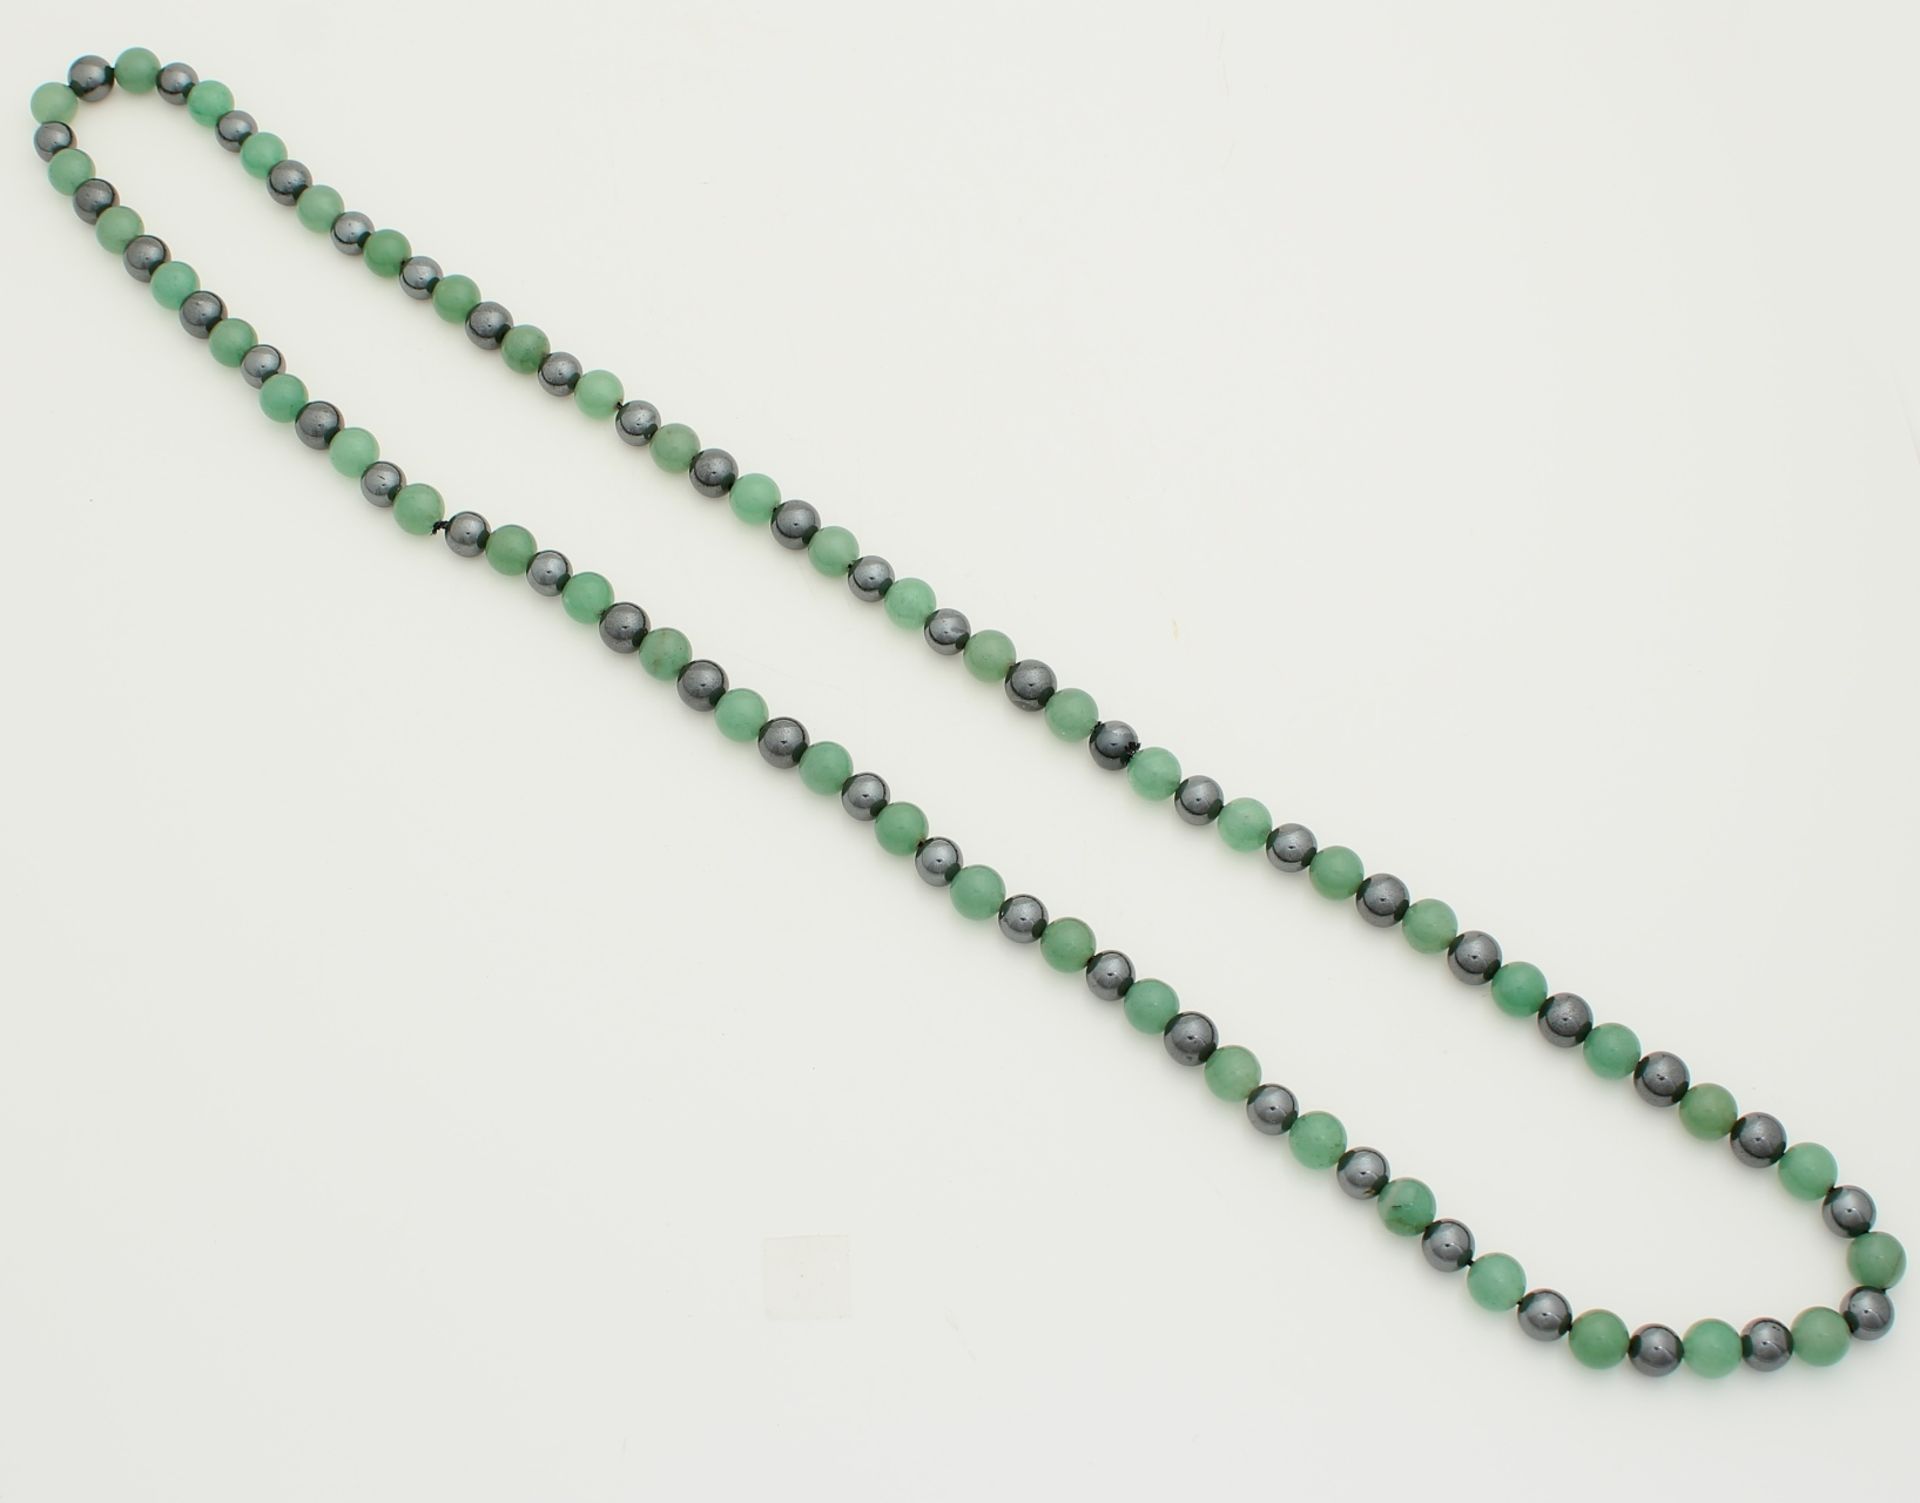 Collier hematite and jade beads, round and knotted. Without closure. Length 70 cm. Collier Hämatit